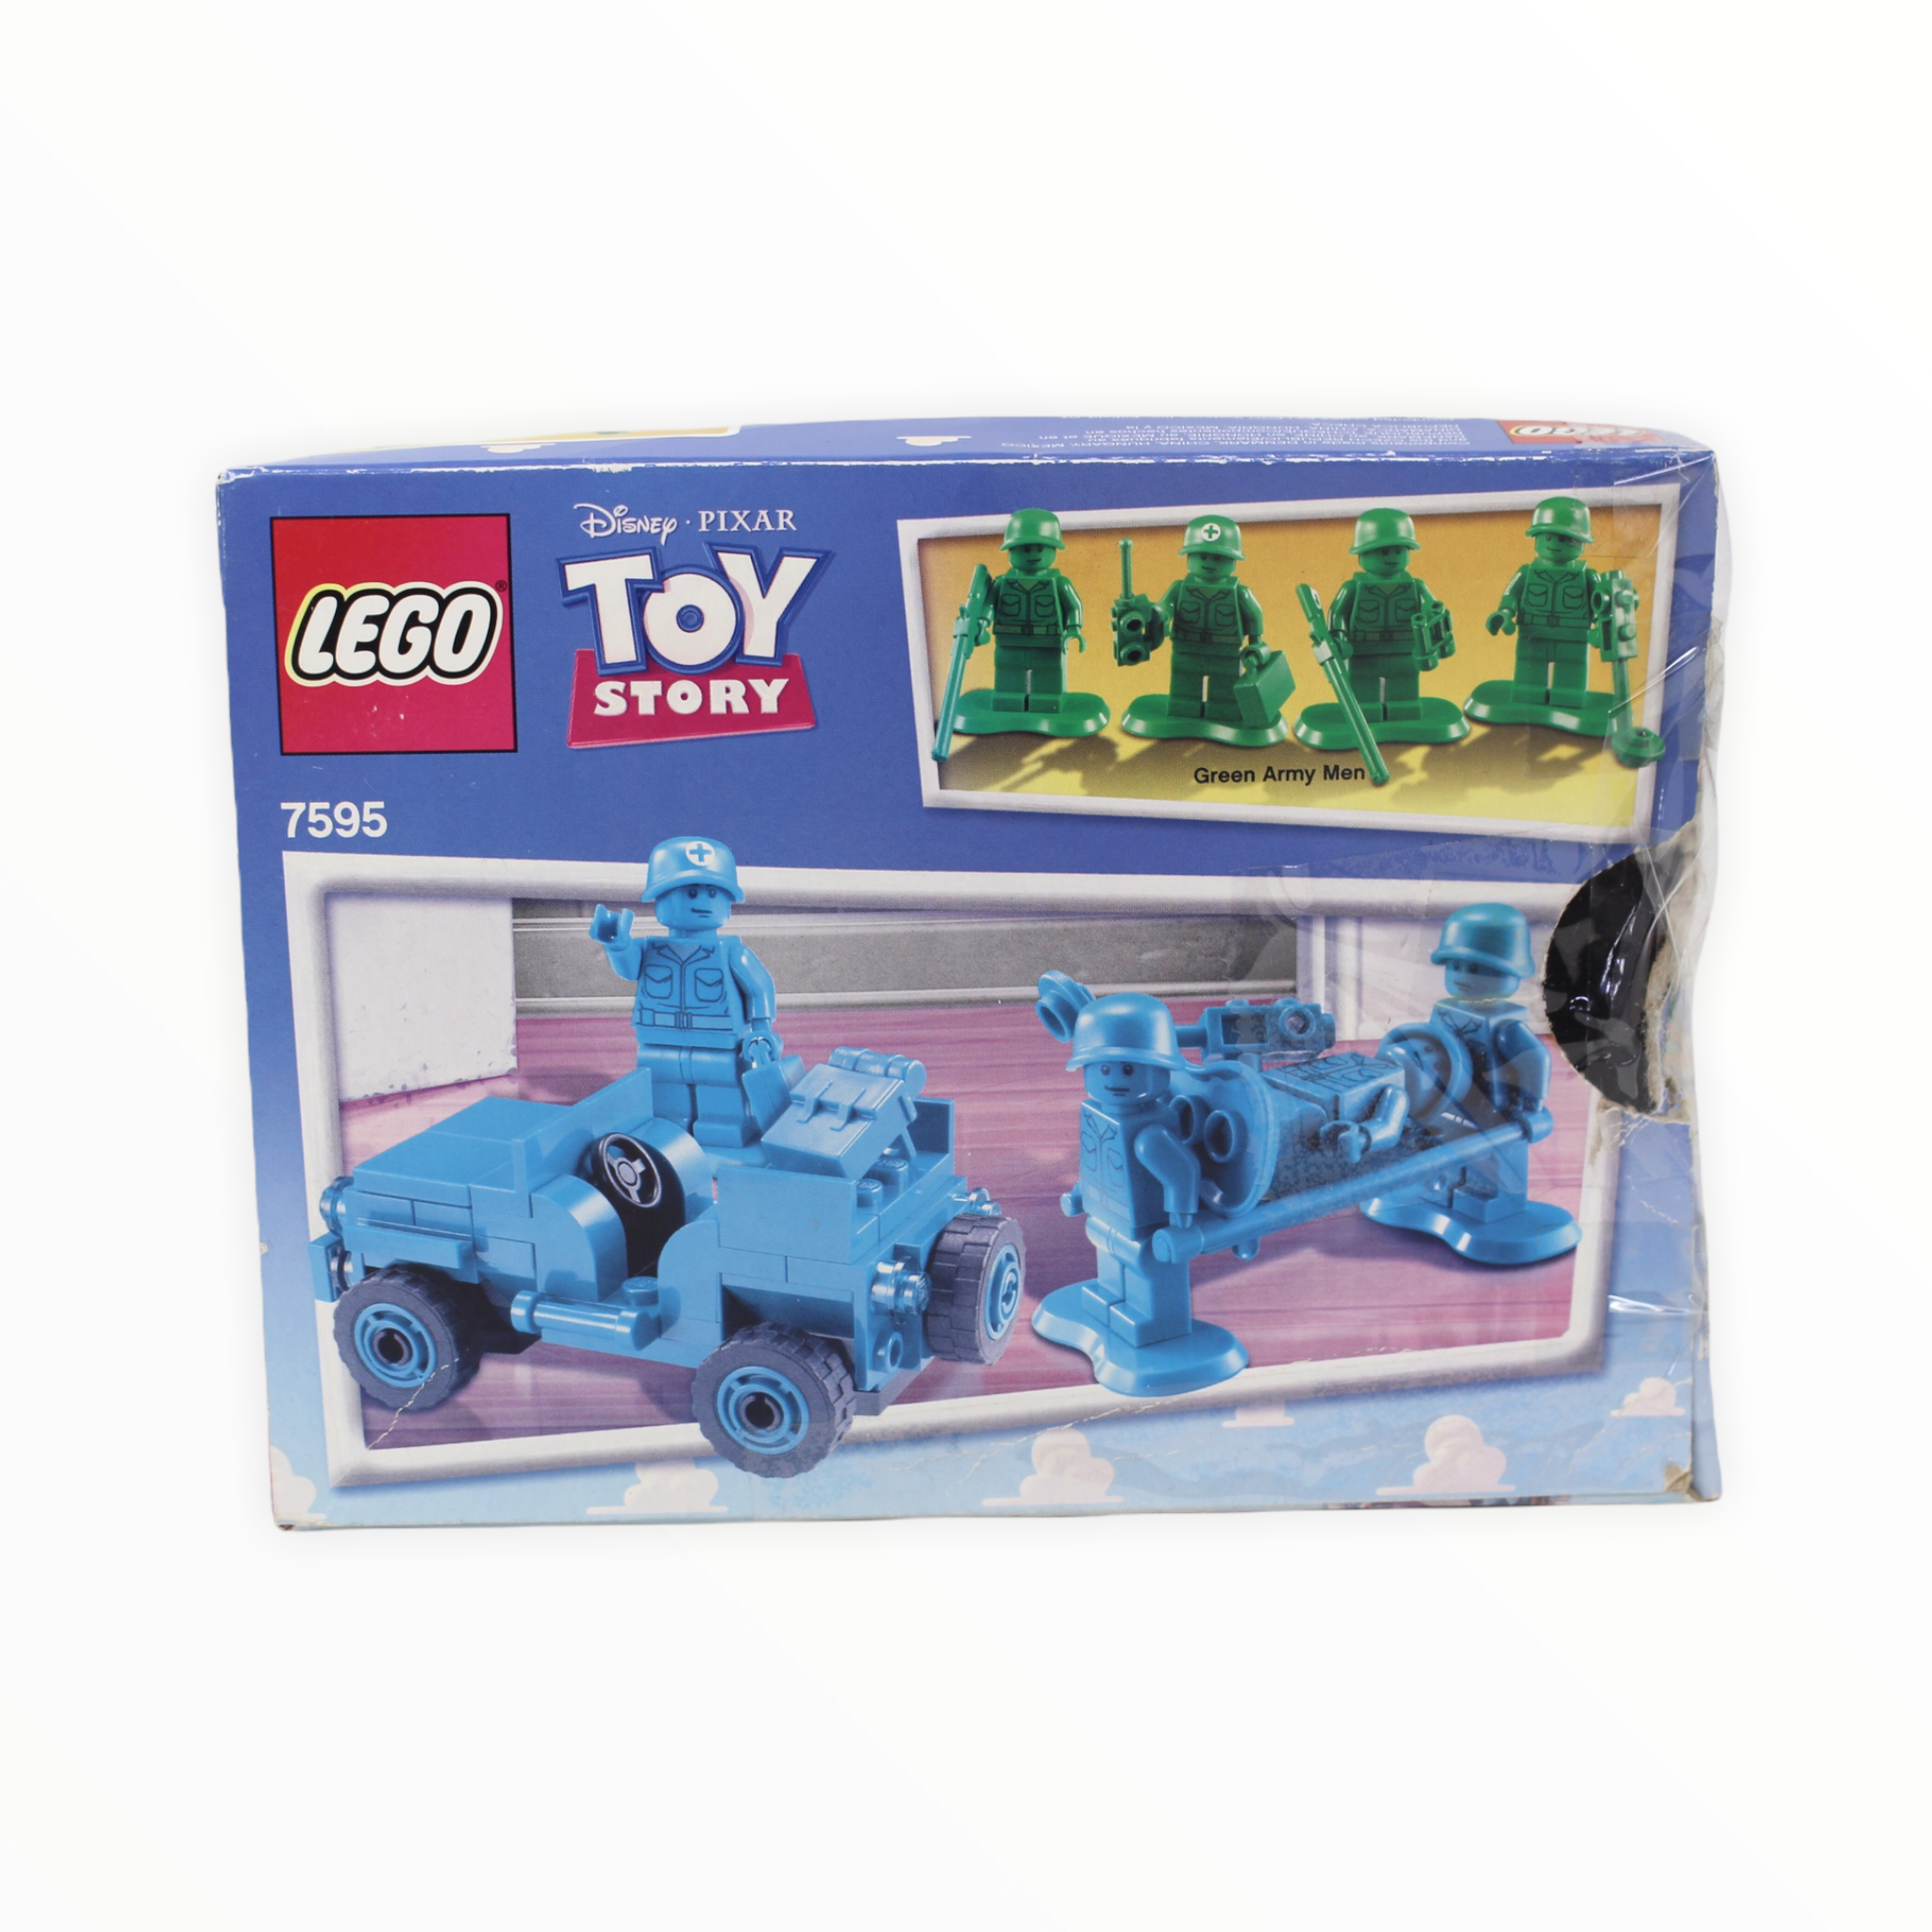 Certified Used Set 7595 Toy Story Army Men on Patrol